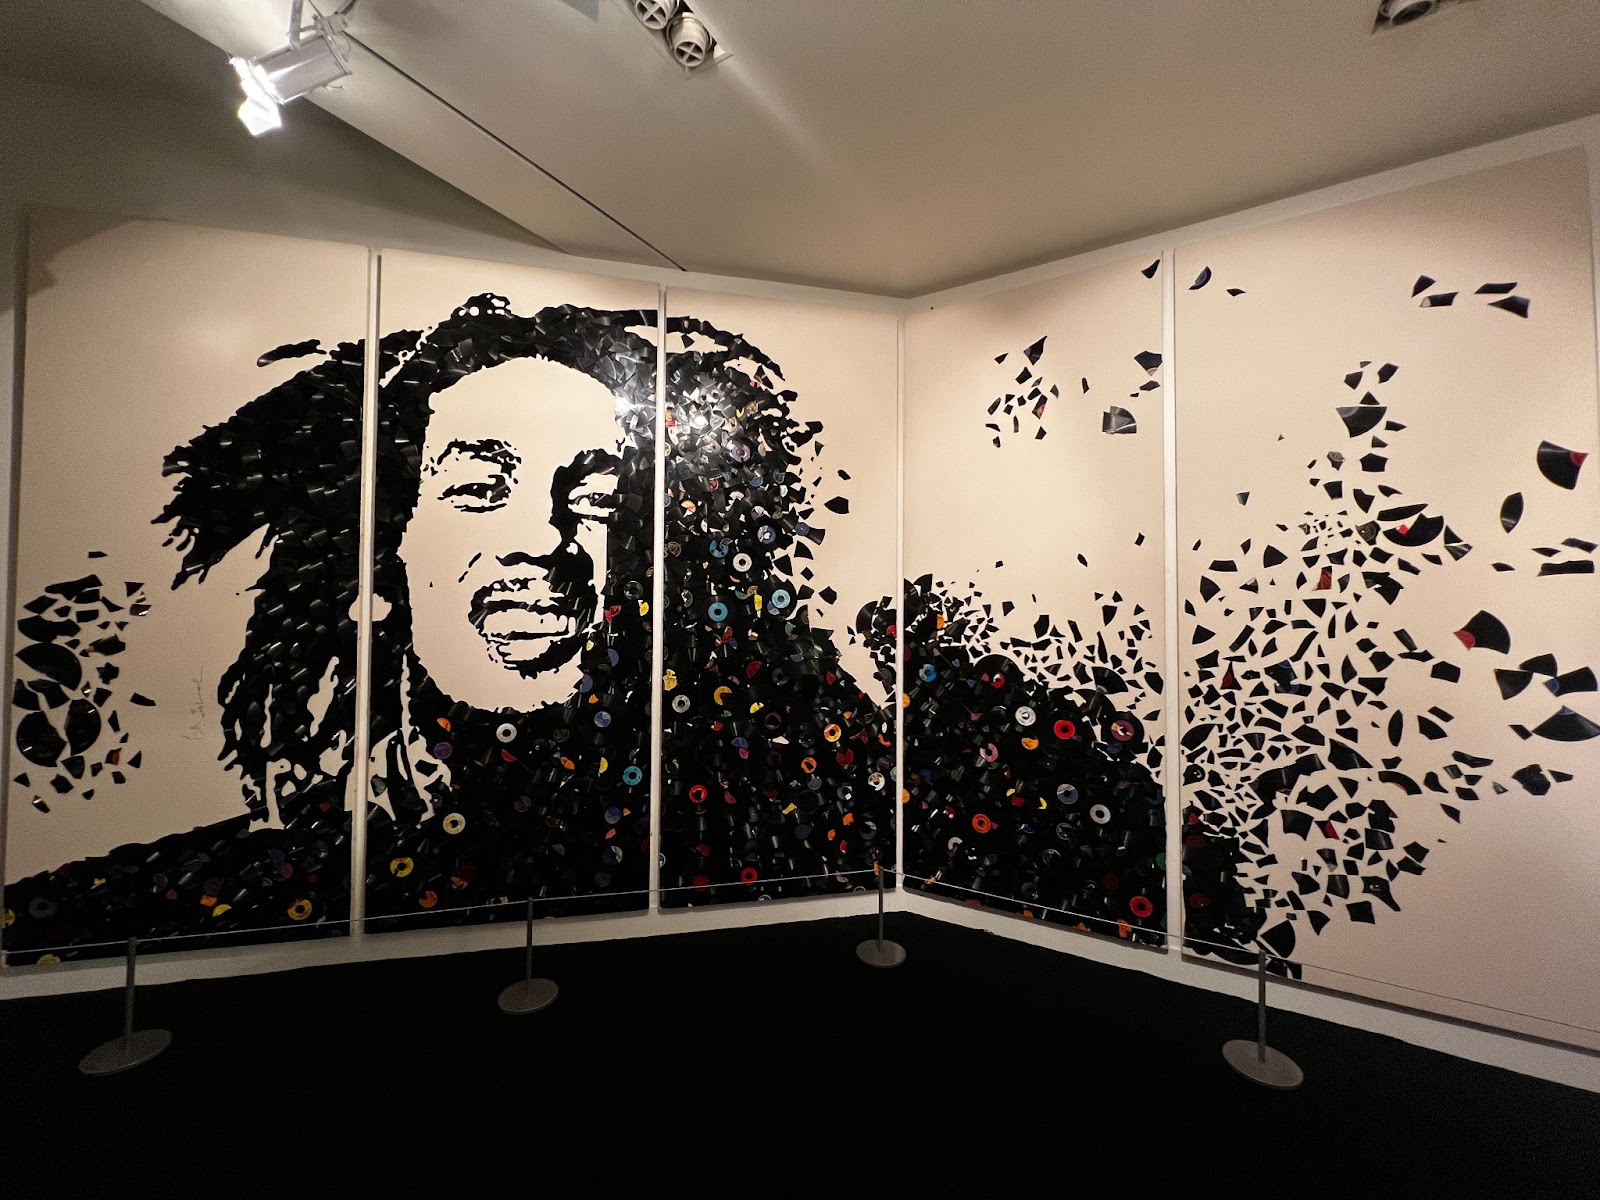 A mural of Bob Marley made out of broken vinyl records